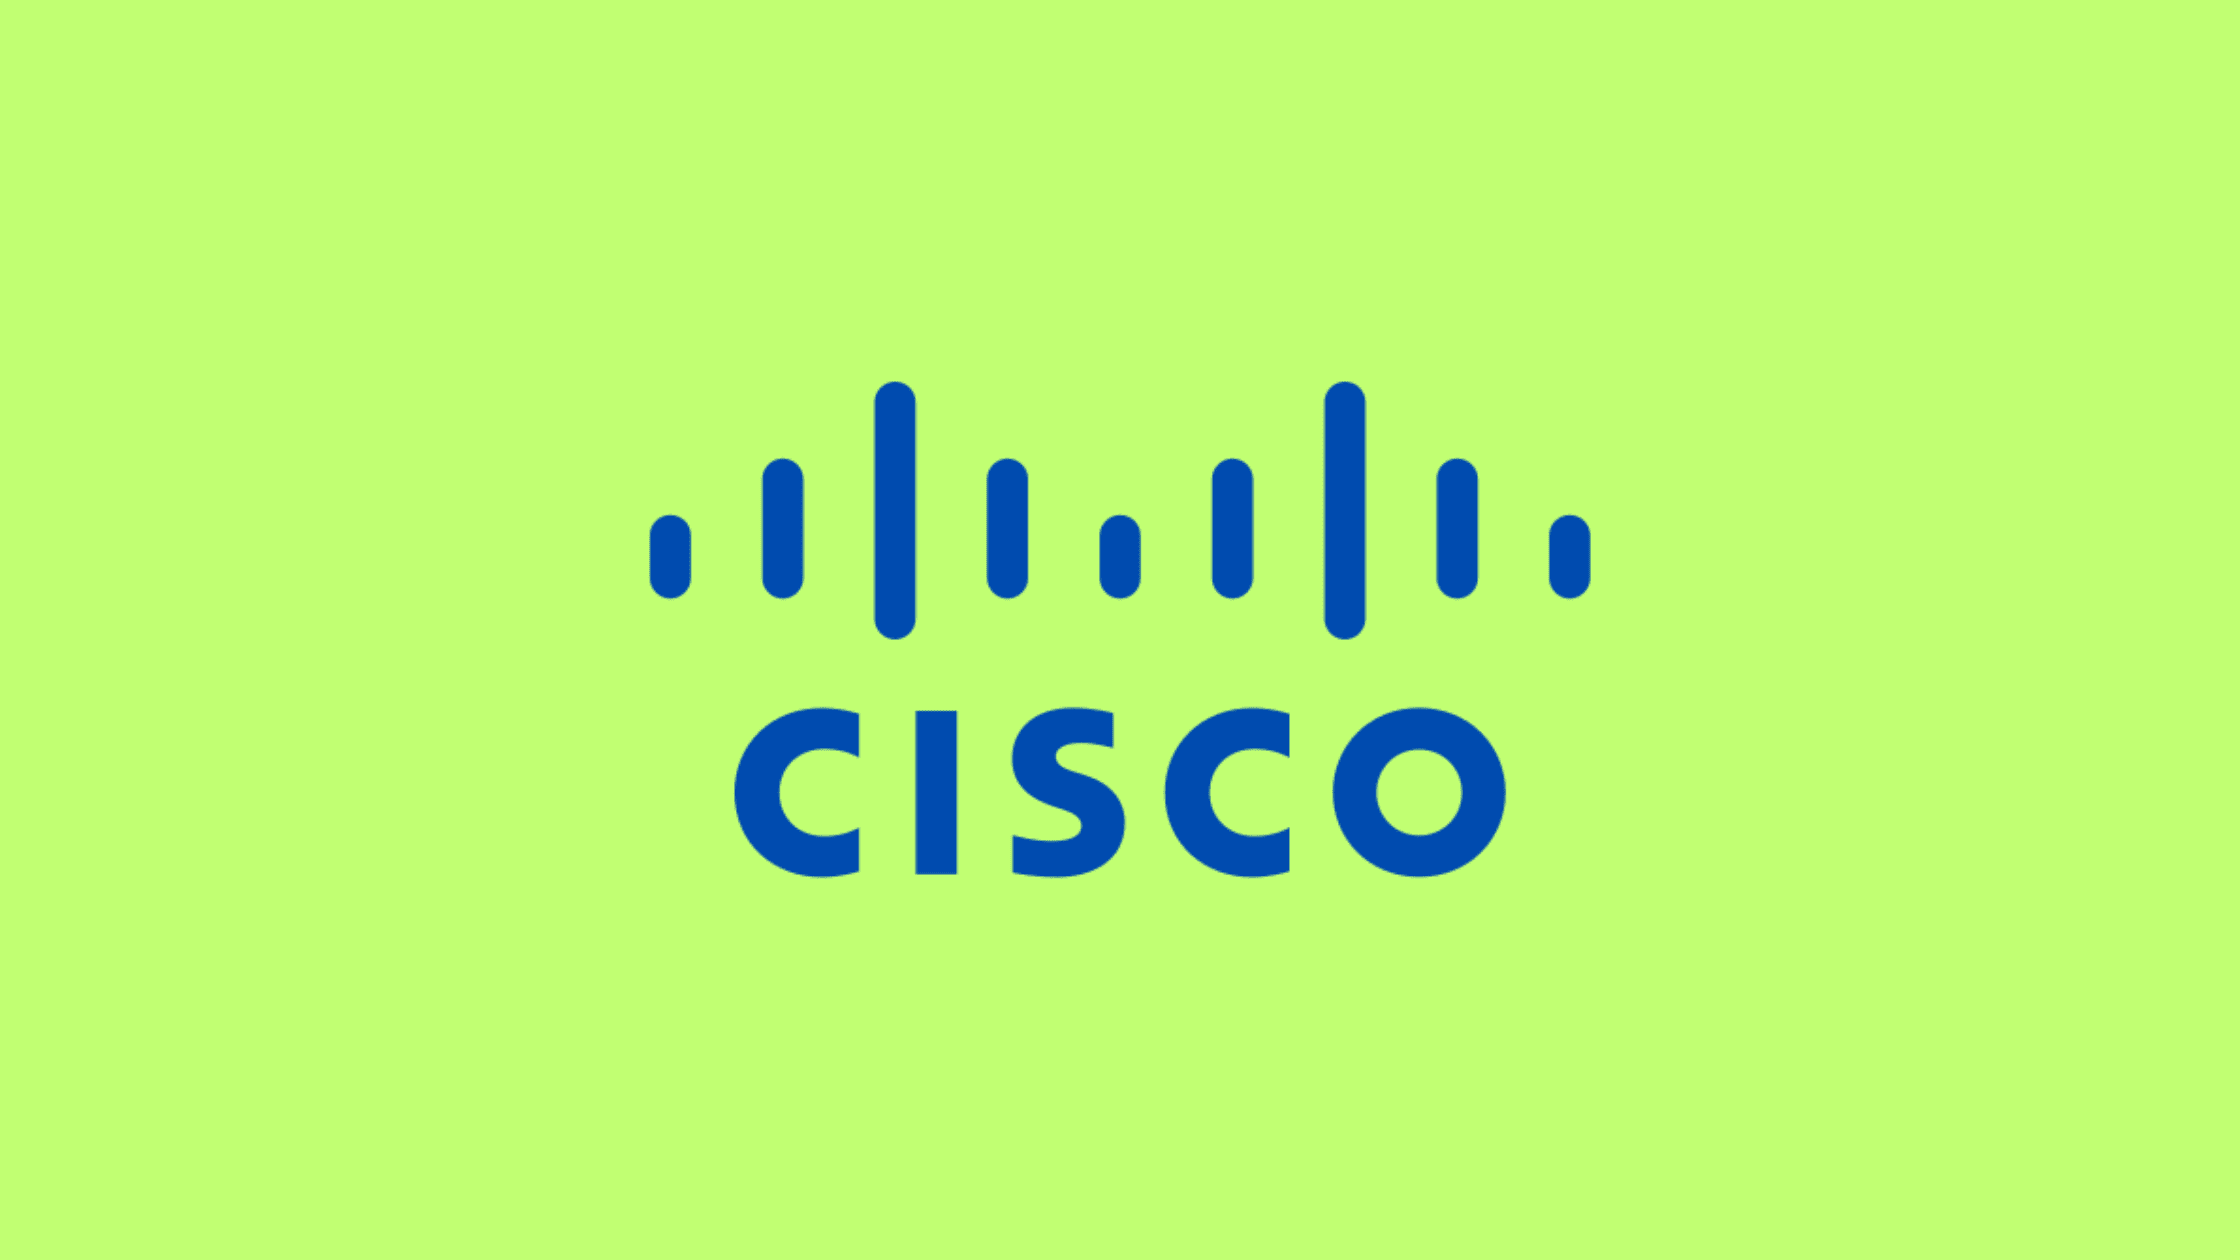 How To Fix Cve 2023 20154 An Authentication Bypass Vulnerability In Cisco Modeling Labs